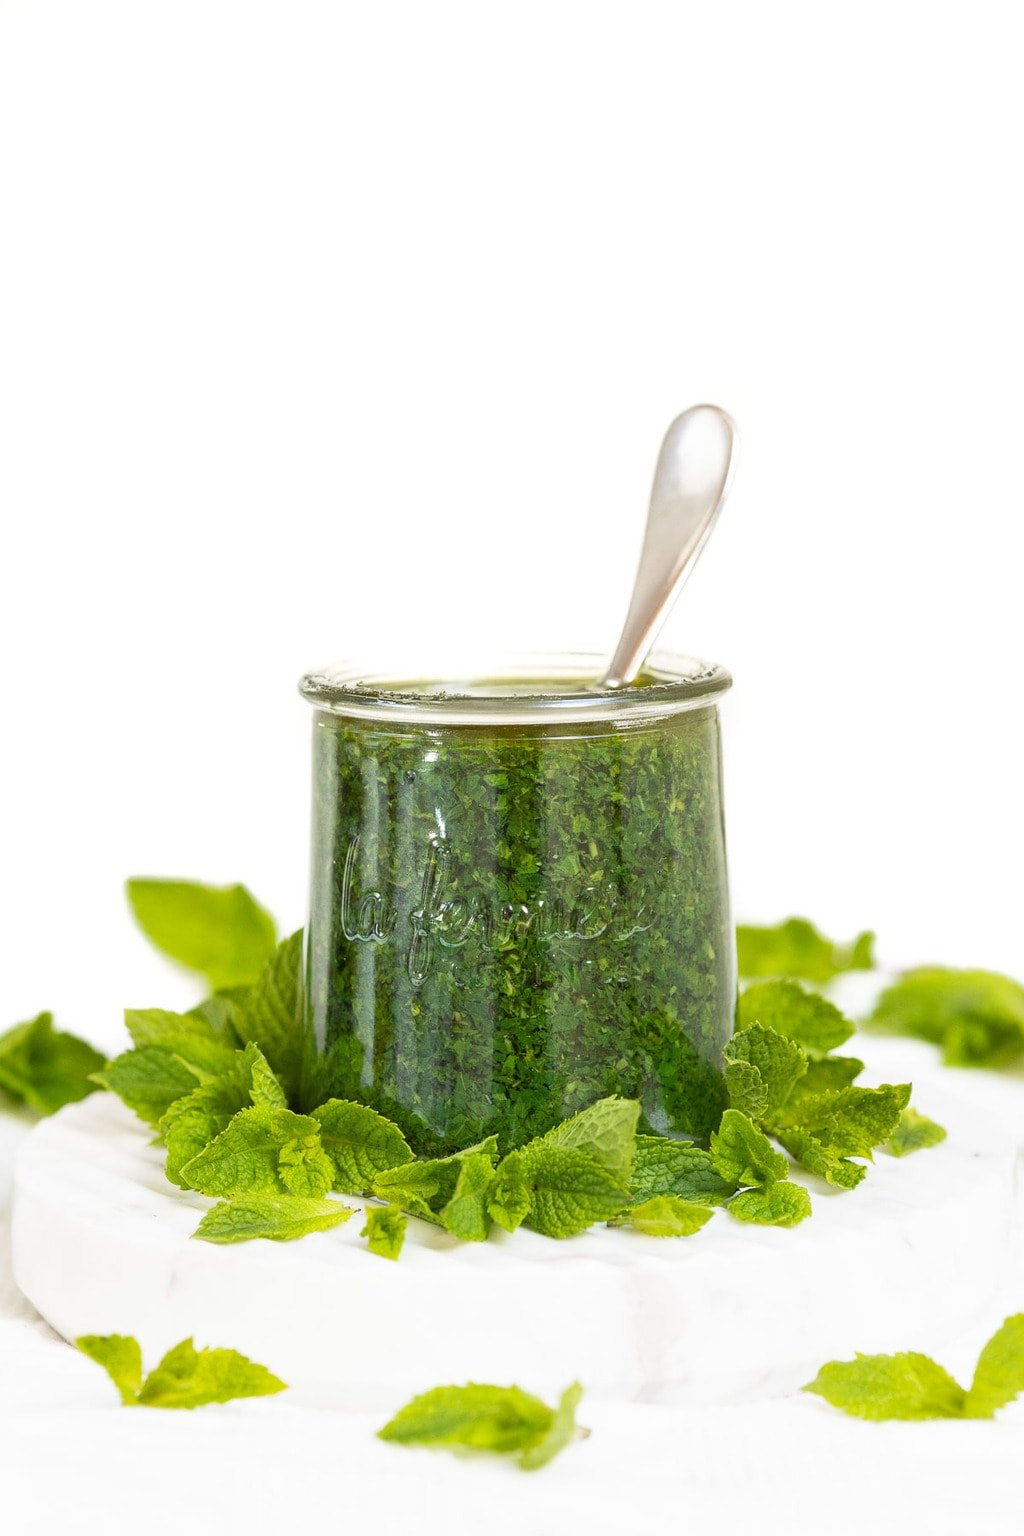 Vertical photo of a glass Weck jar of Franca's Fabulous Italian Mint Pesto surrounded by fresh mint leaves.